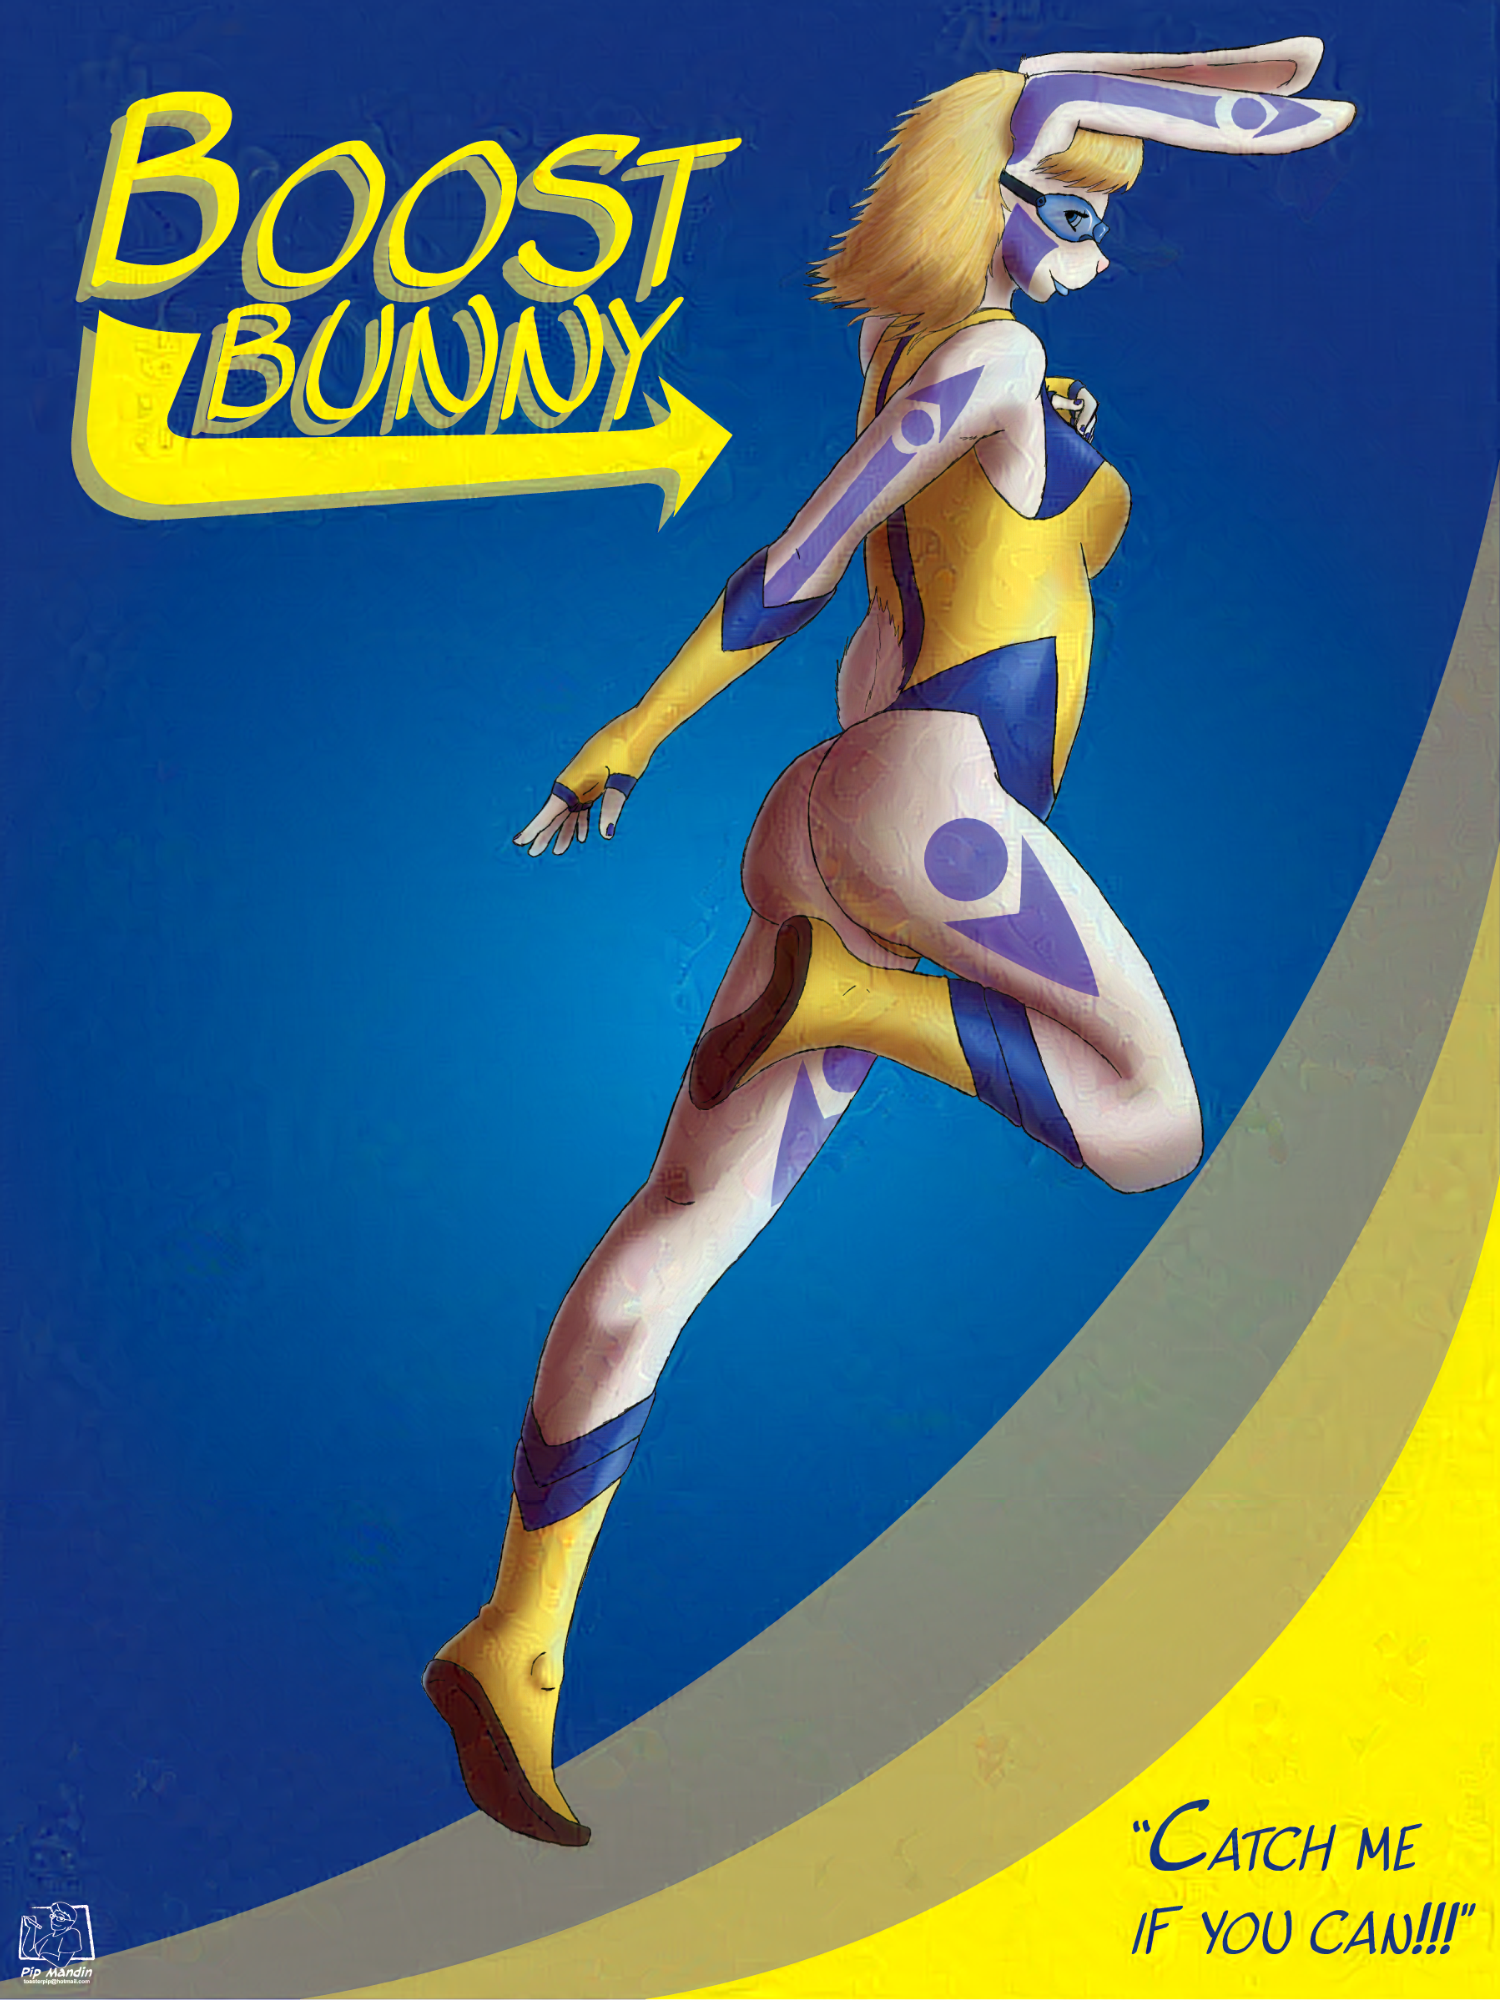 A pinup-style poster featuring a superhero character named "Boost Bunny". She is a snowshoe hare anthro woman with a slender, athletic figure. She is posed with one leg drawn up and one arm back, as though leaping or taking an exaggerated running stride. She looks over her shoulder at the viewer with a coy smile. Her costume is a yellow and blue leotard, gloves, and boots, and blue tinted goggles.</body></html>